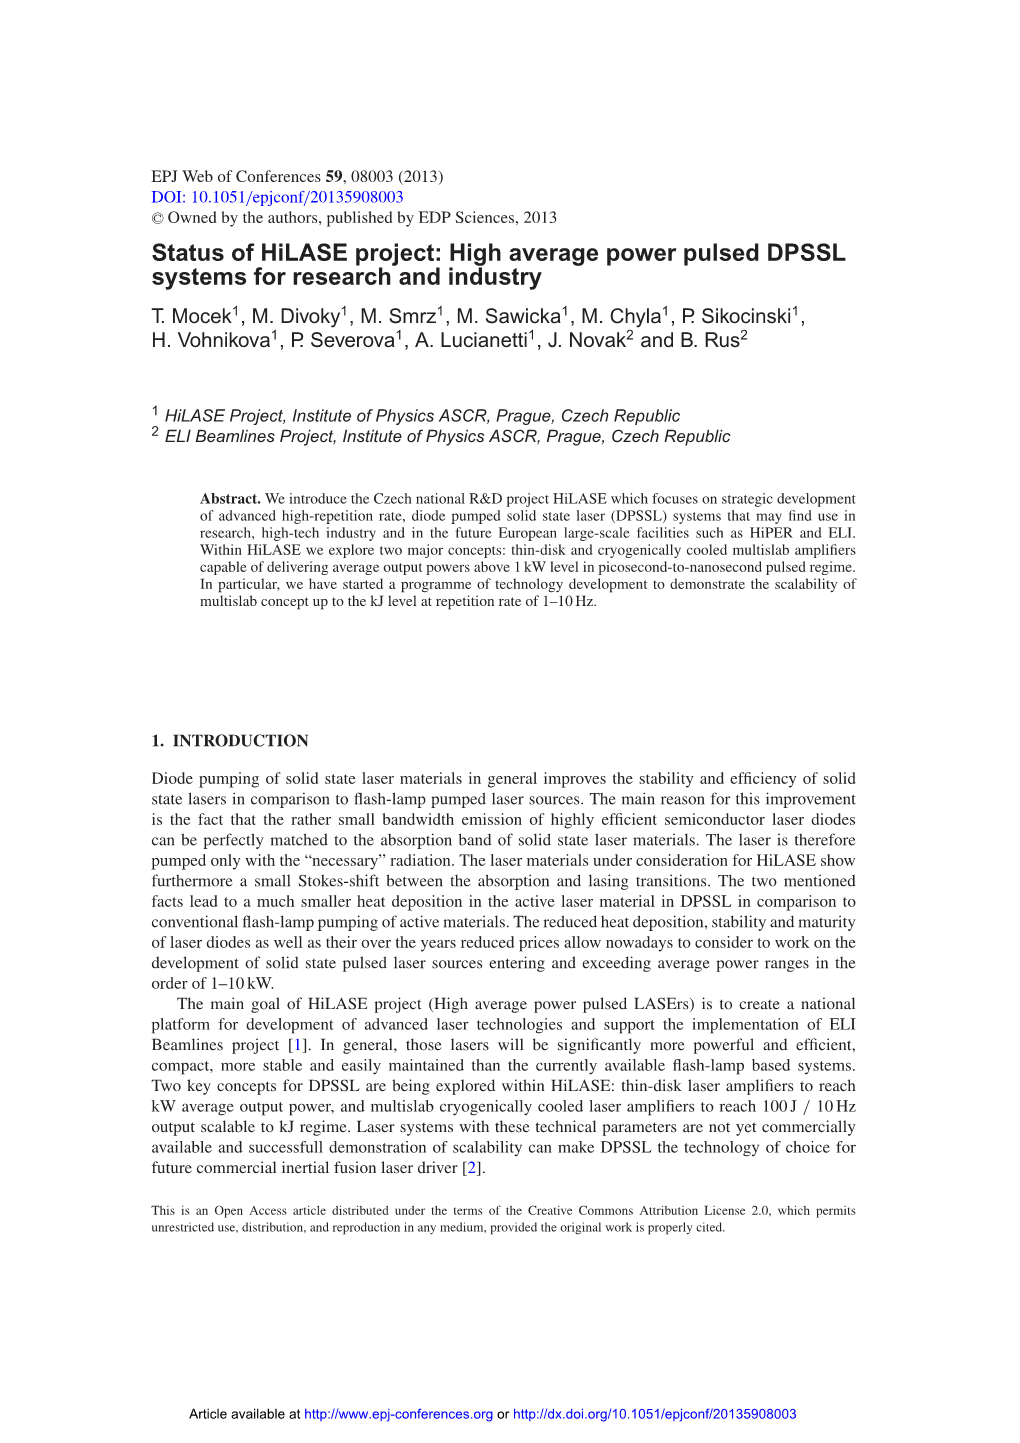 Status of Hilase Project: High Average Power Pulsed DPSSL Systems for Research and Industry T